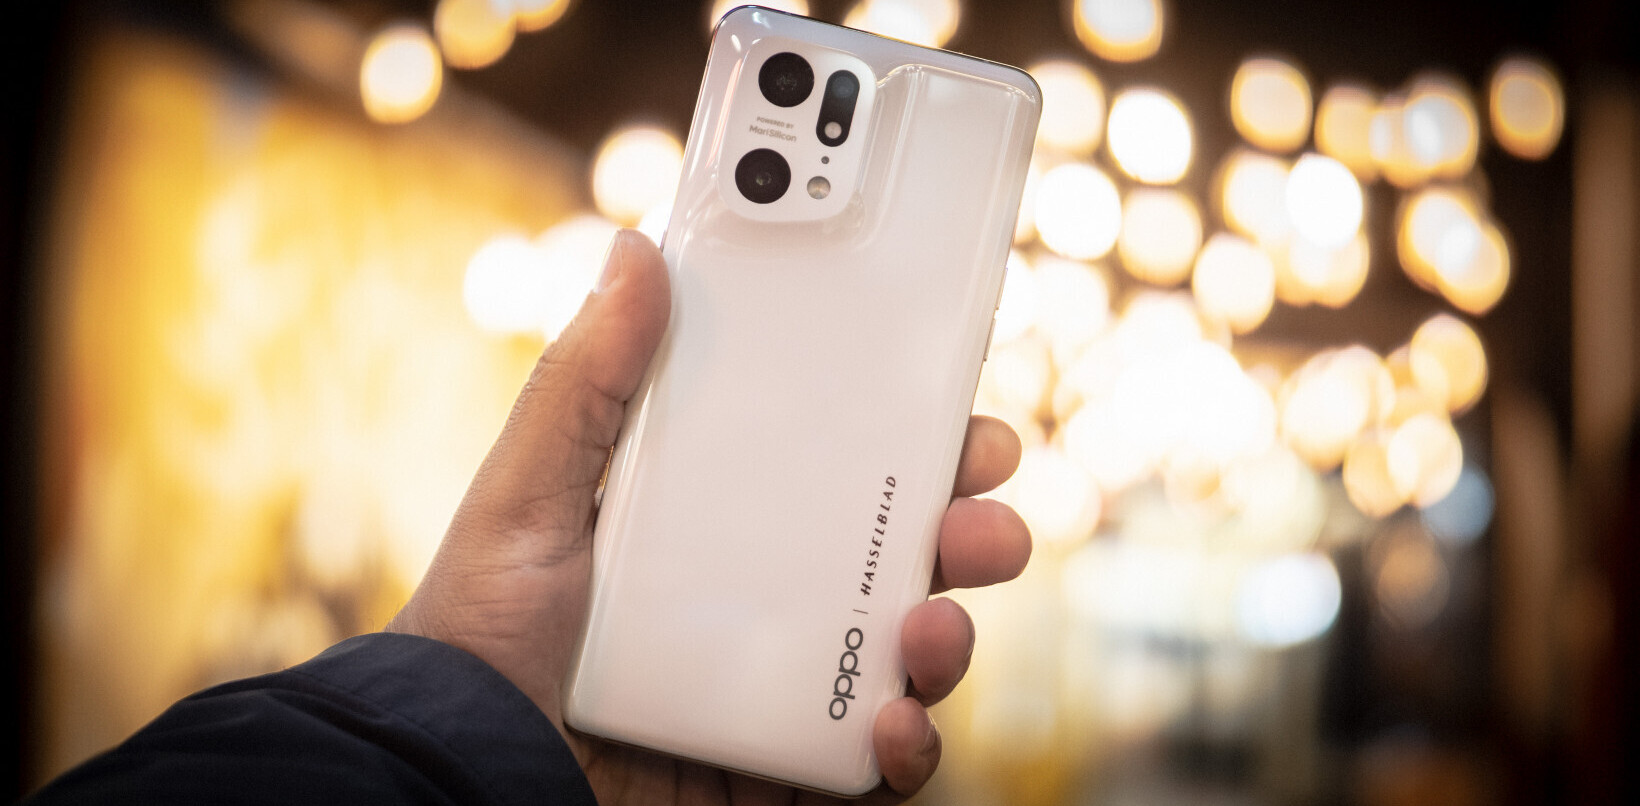 6 revelations I had during the Oppo Reno 2’s European launch